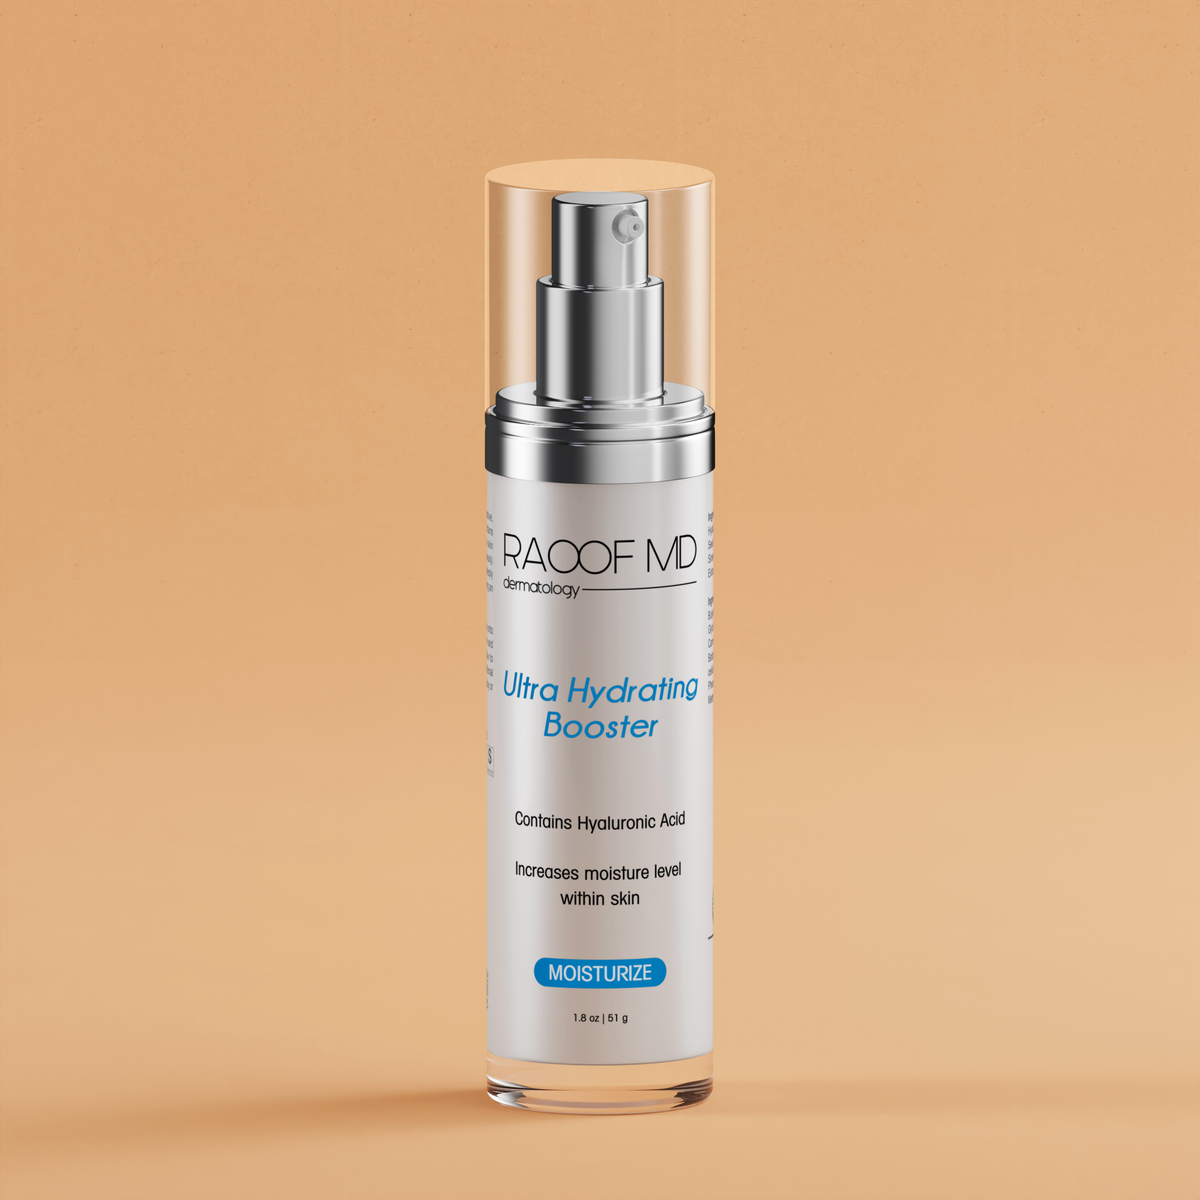 Ultra Hydrating Booster by RAOOF MD dermatology